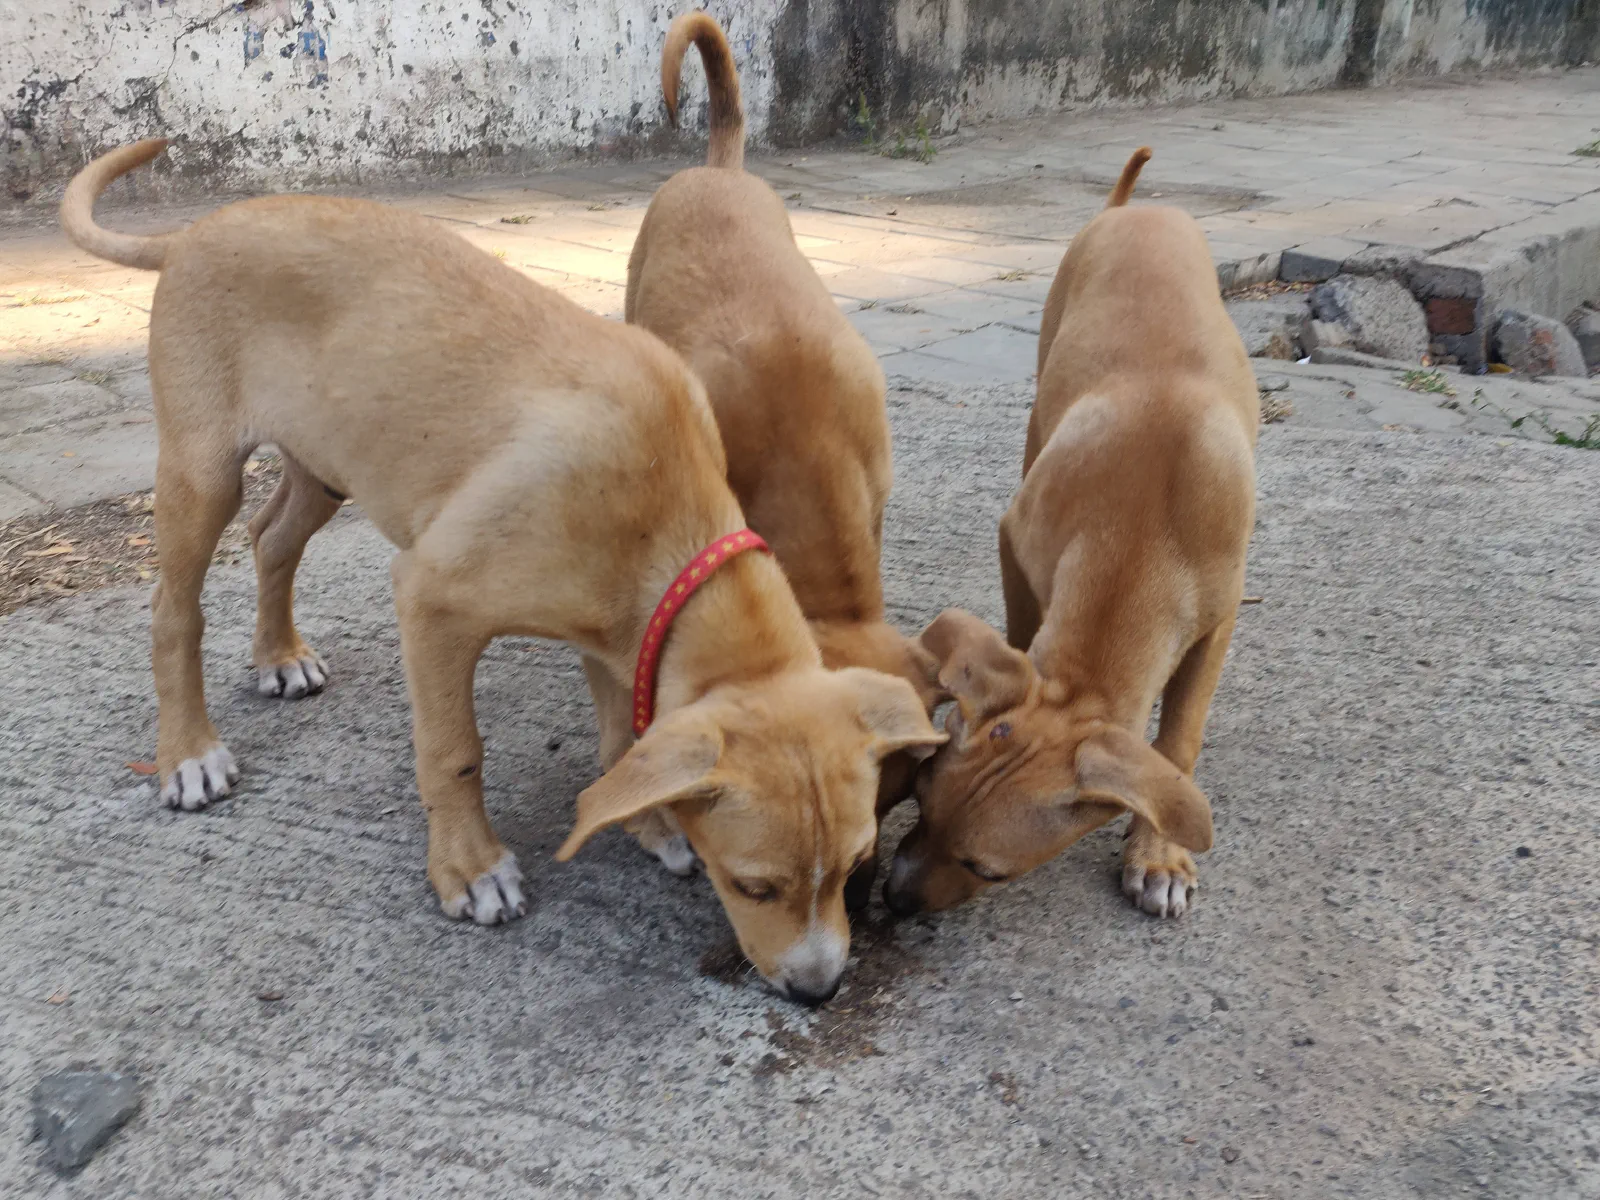 Brown puppies licking something off the ground
